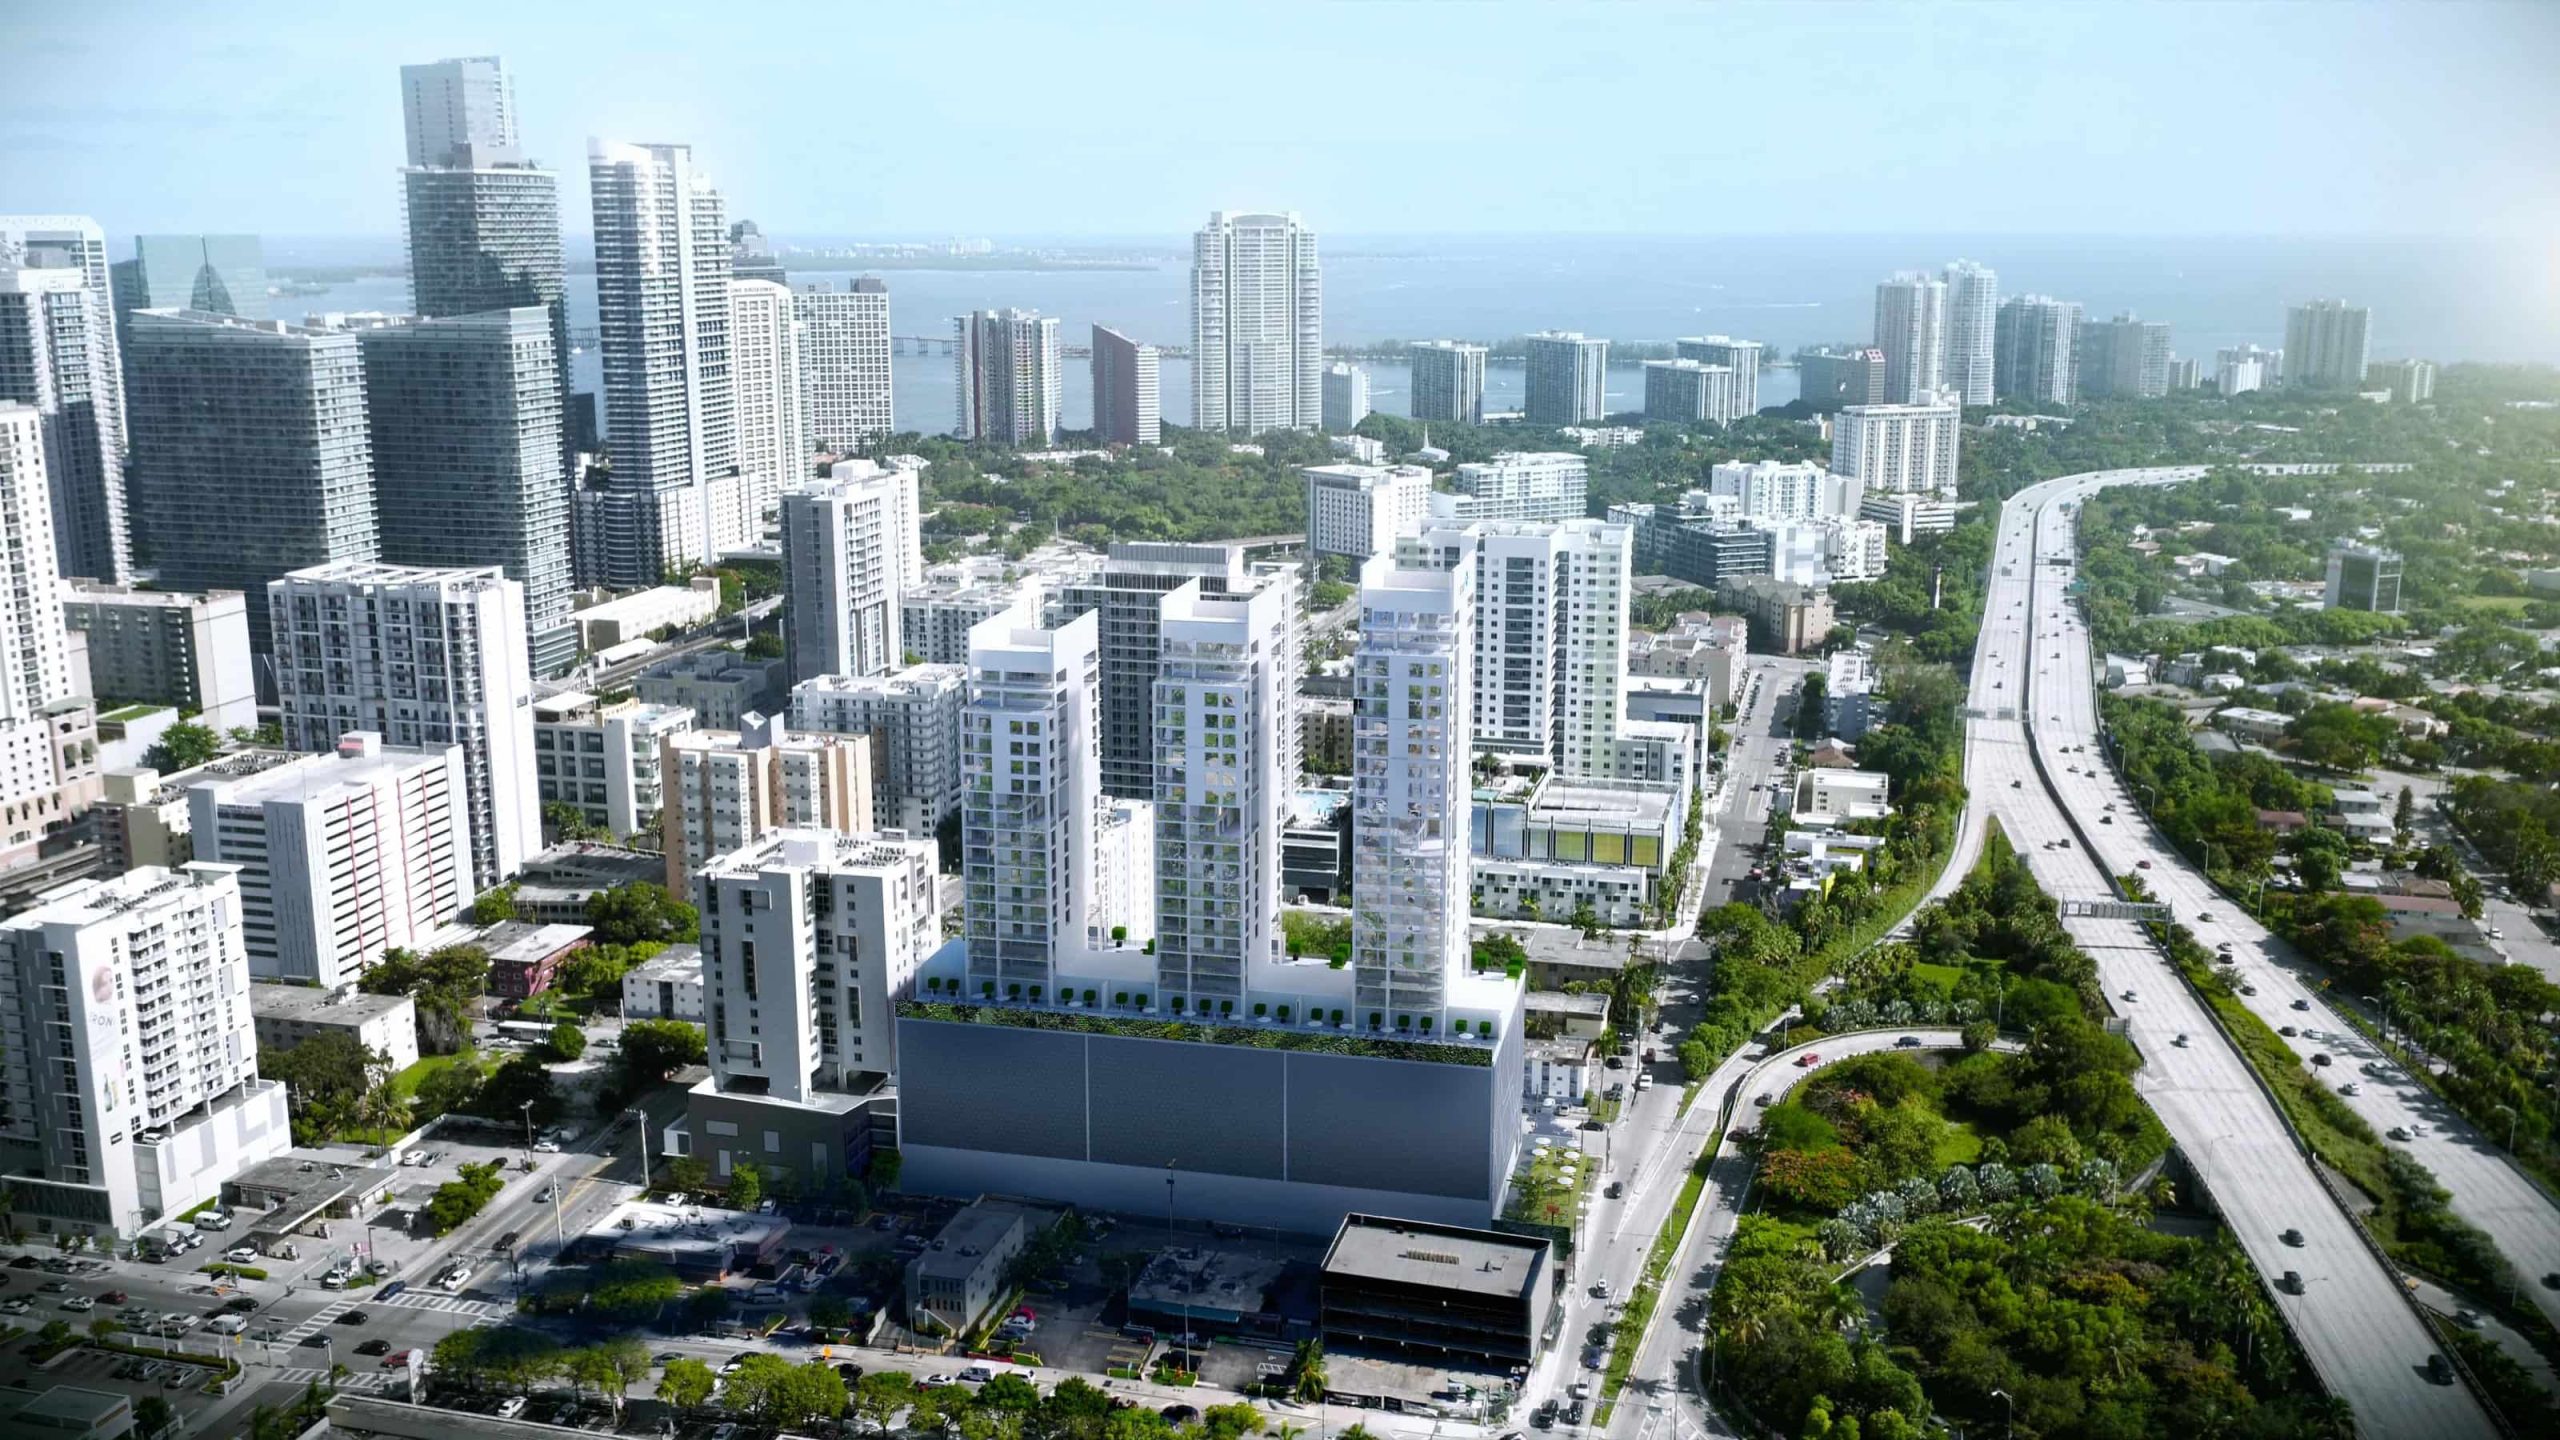 Smart Brickell condo to break ground as the first of its kind in Miami, Fl